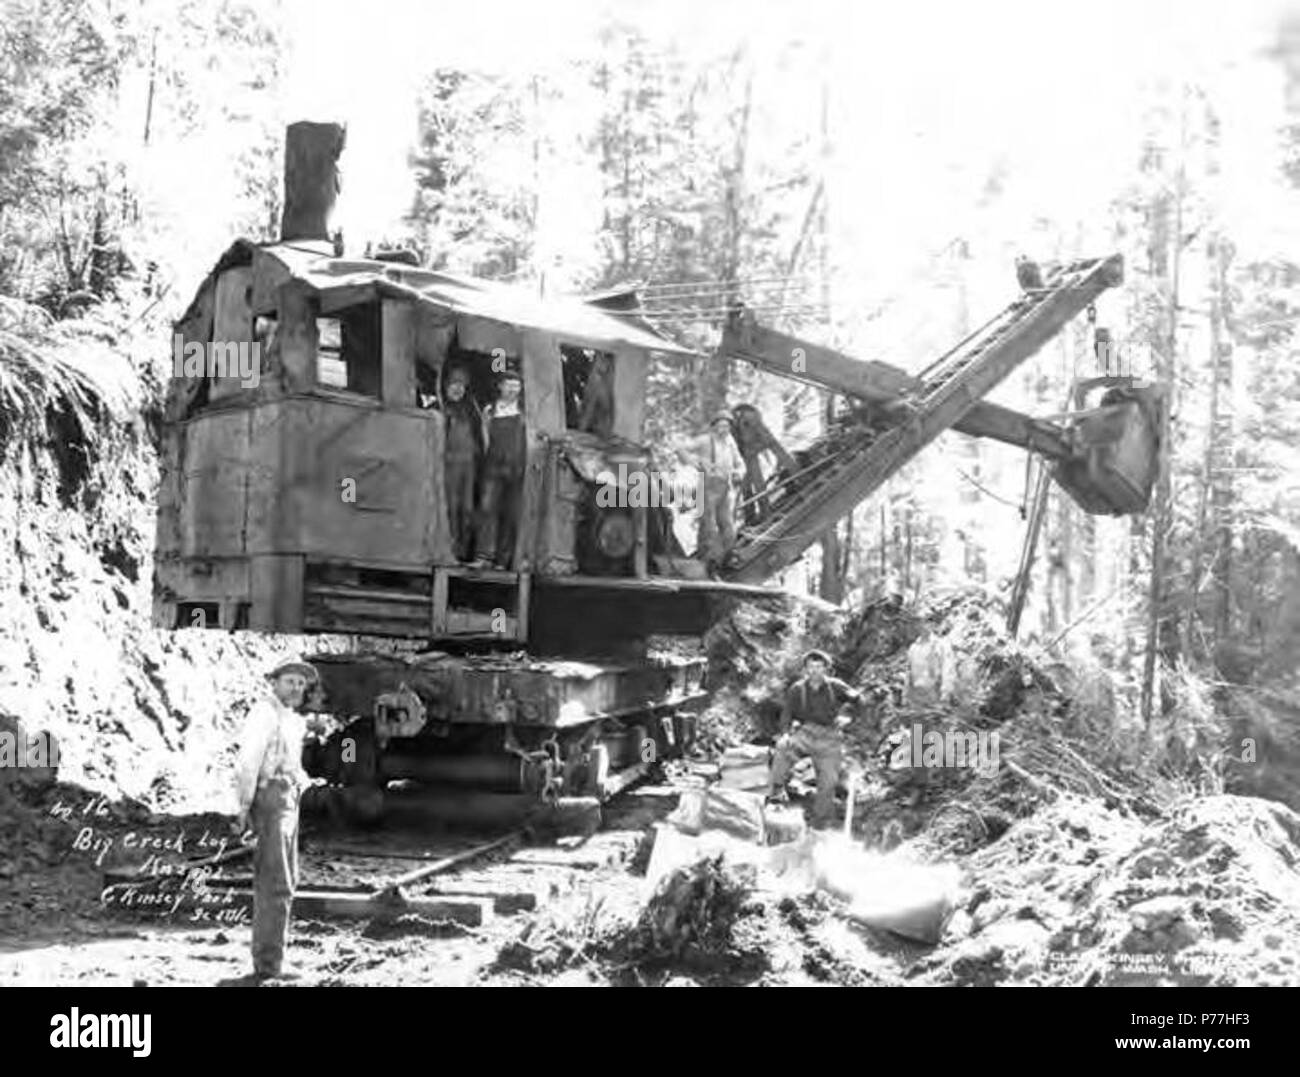 And the steam shovel фото 16